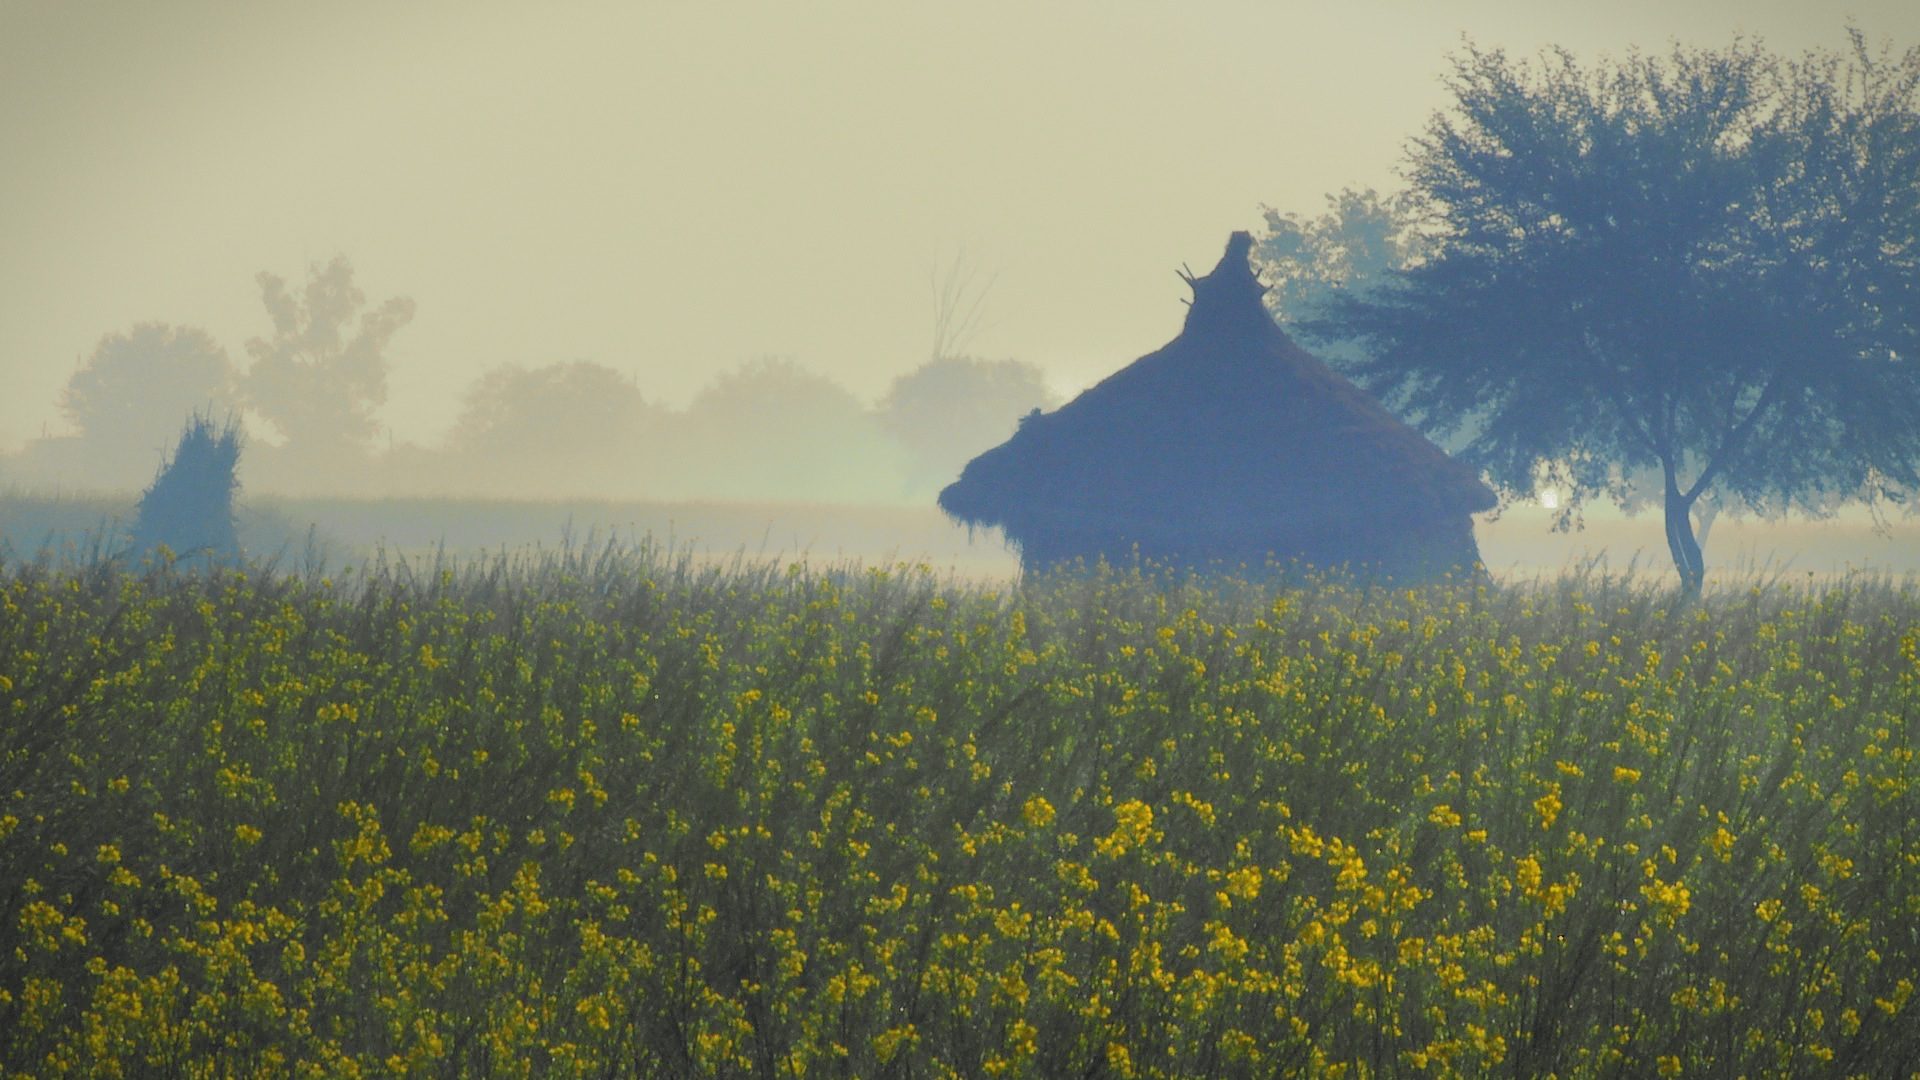 Picturesque winter fields of blossoming mustard, Vrindavan, India. A still from a multi-award winning film "reconnection".